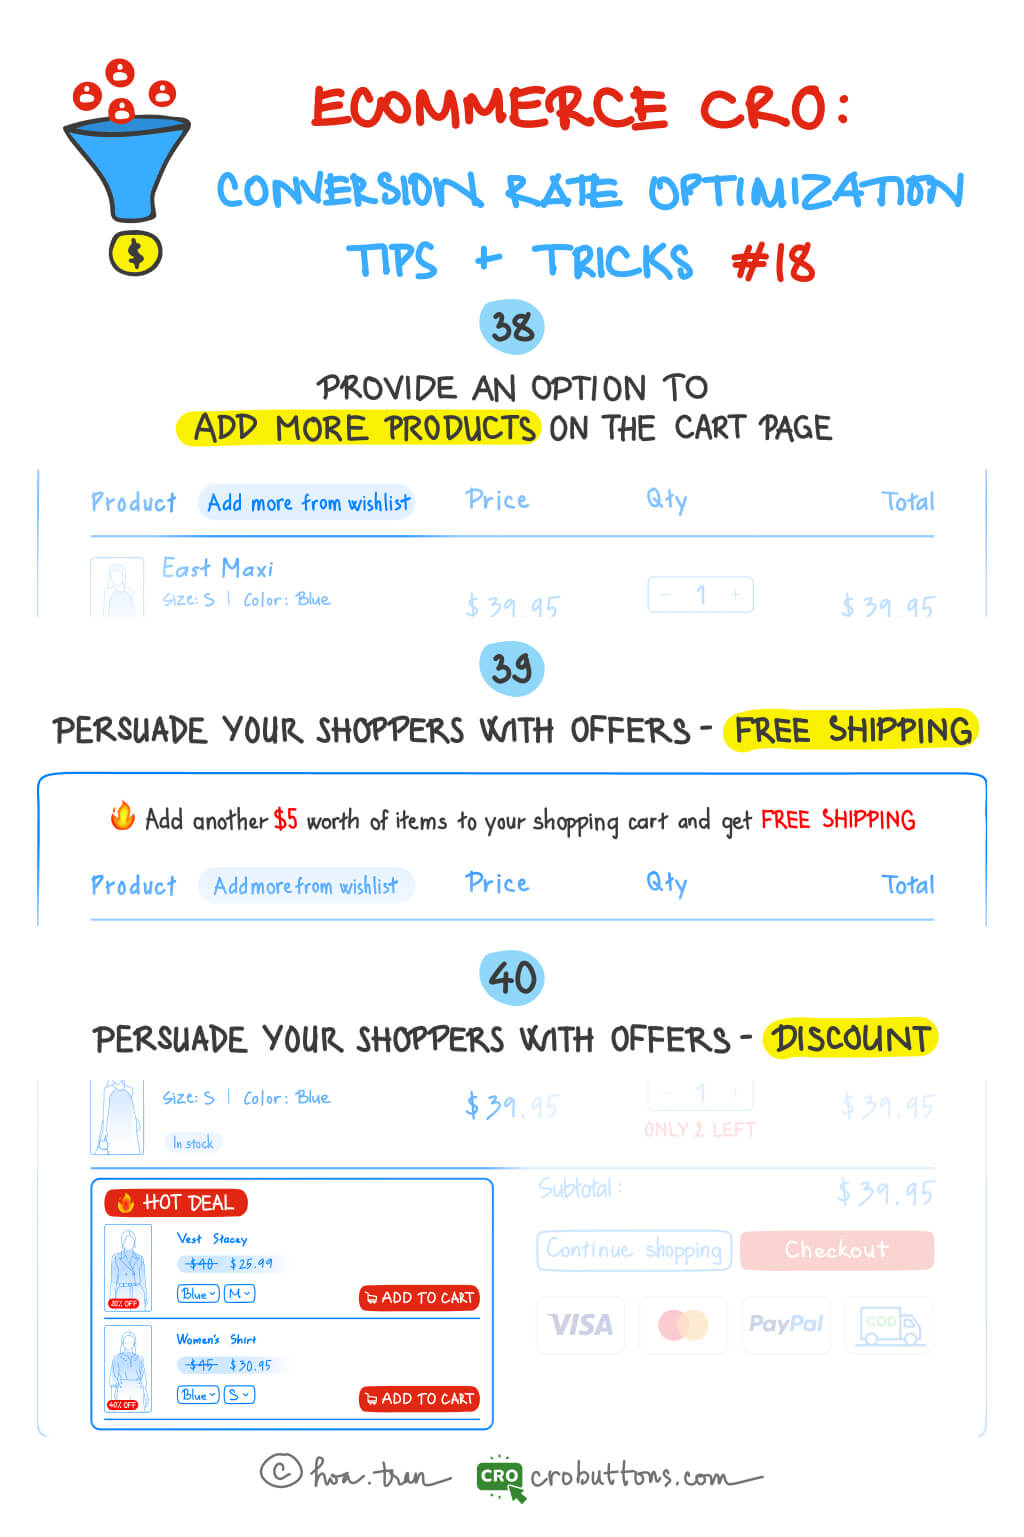 3 Ways to Get Customers to Add More Products to the Cart – eCommerce CRO Tips & Tricks #18